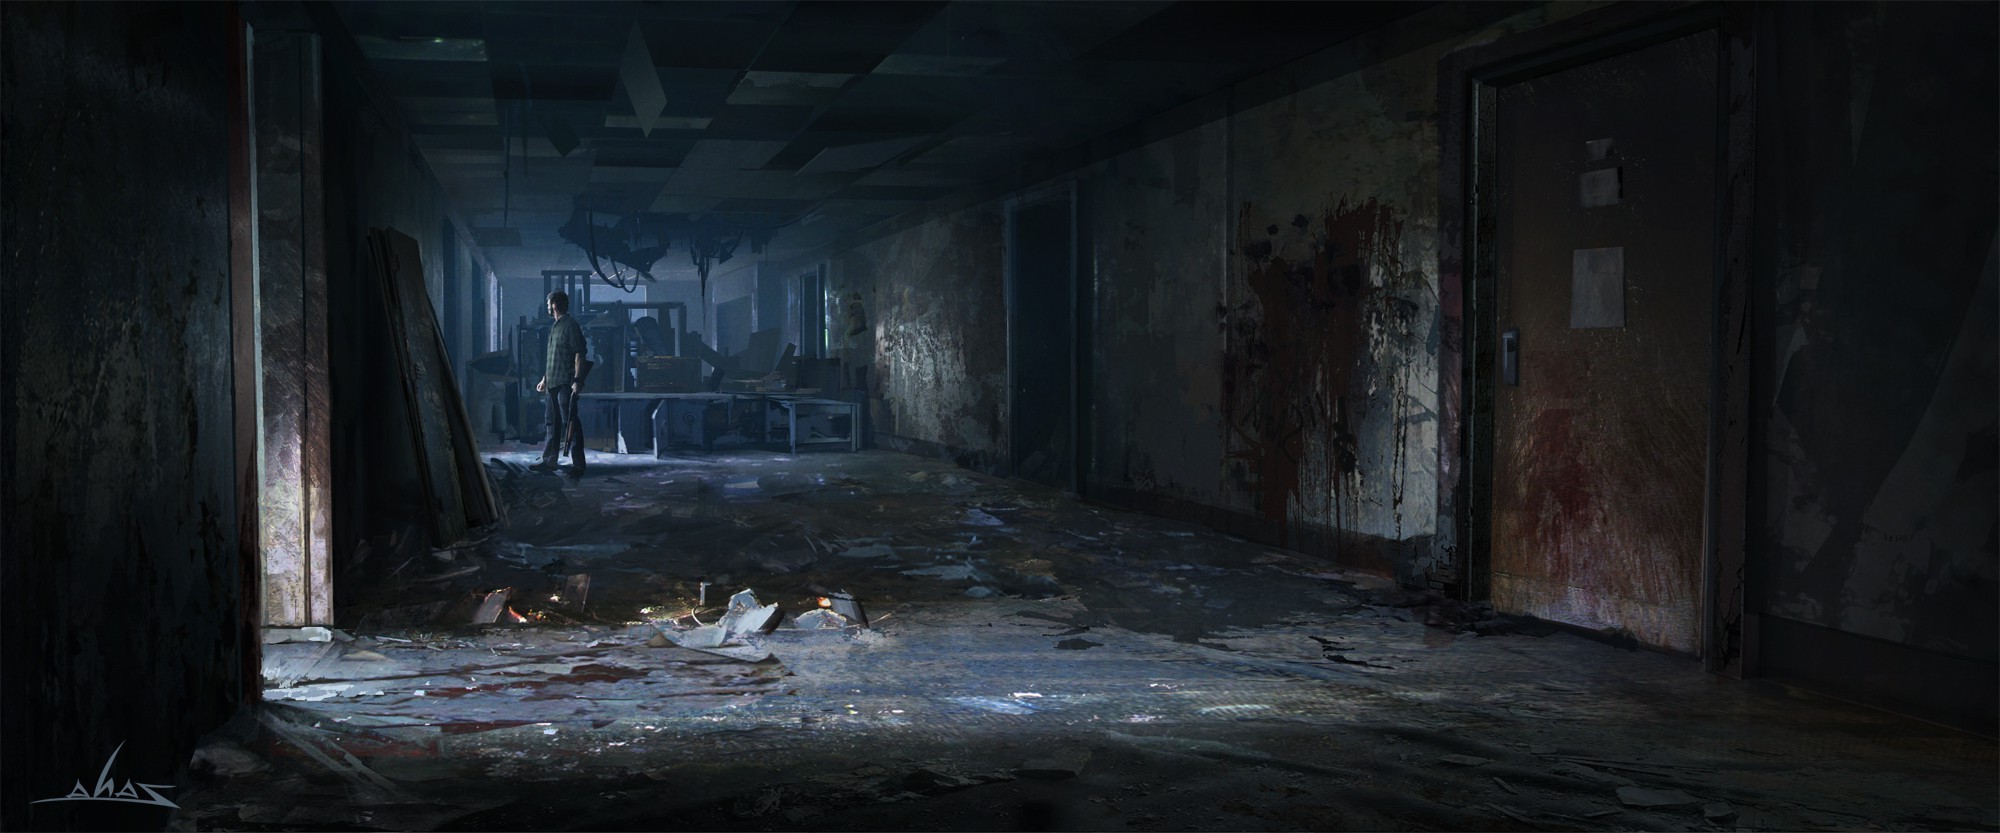 The Last Of Us, Concept Art, Video Games, Apocalyptic Wallpaper